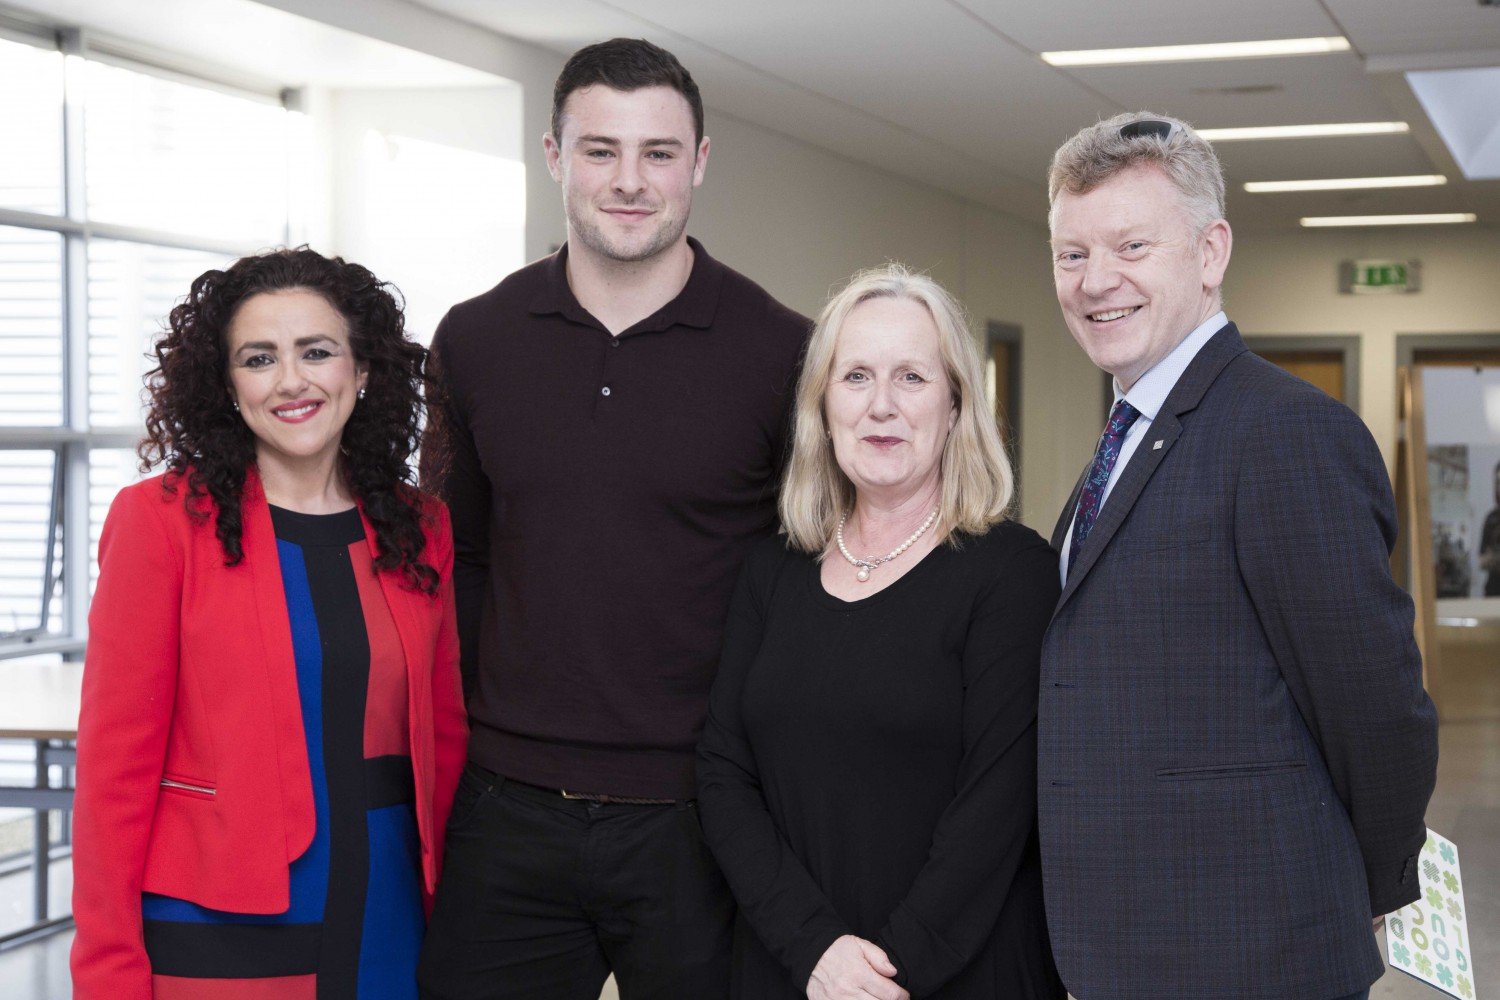 Denise McMorrow, Robbie Henshaw, Dr. Annie Doona & Dr. Andrew Power